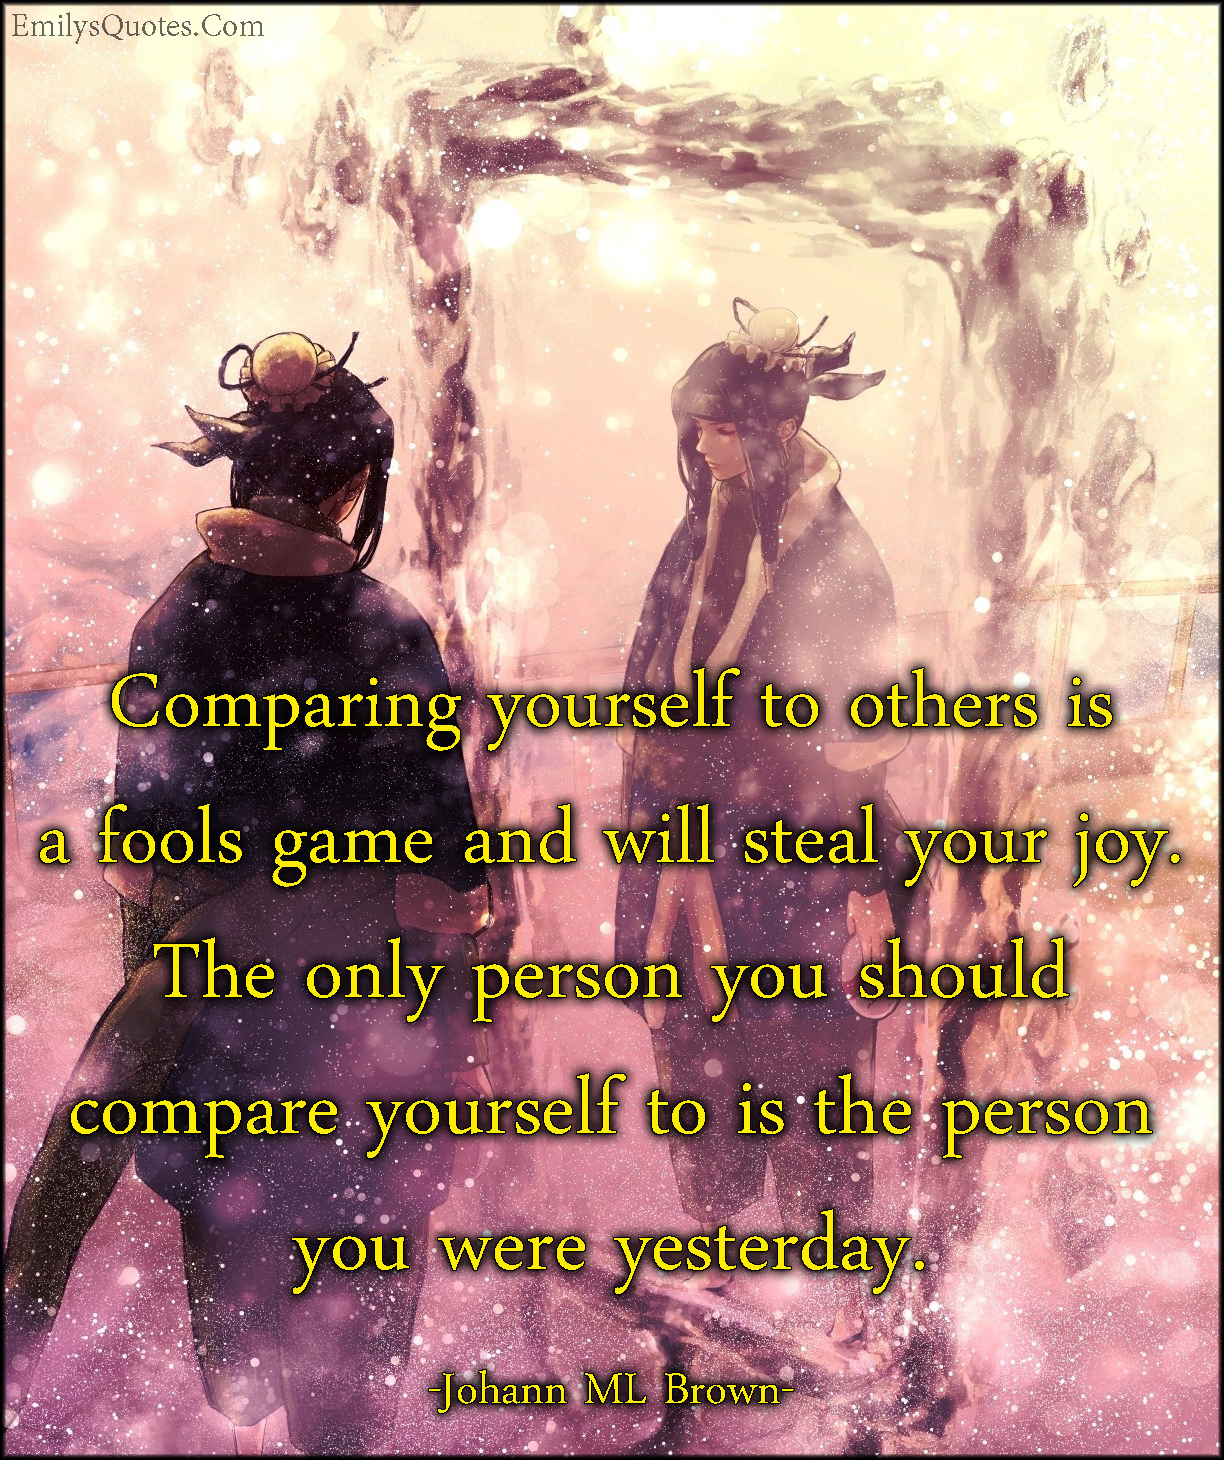 Comparing yourself to others is a fools game and will steal your joy. The only person to compare yourself to is the person you were yesterday